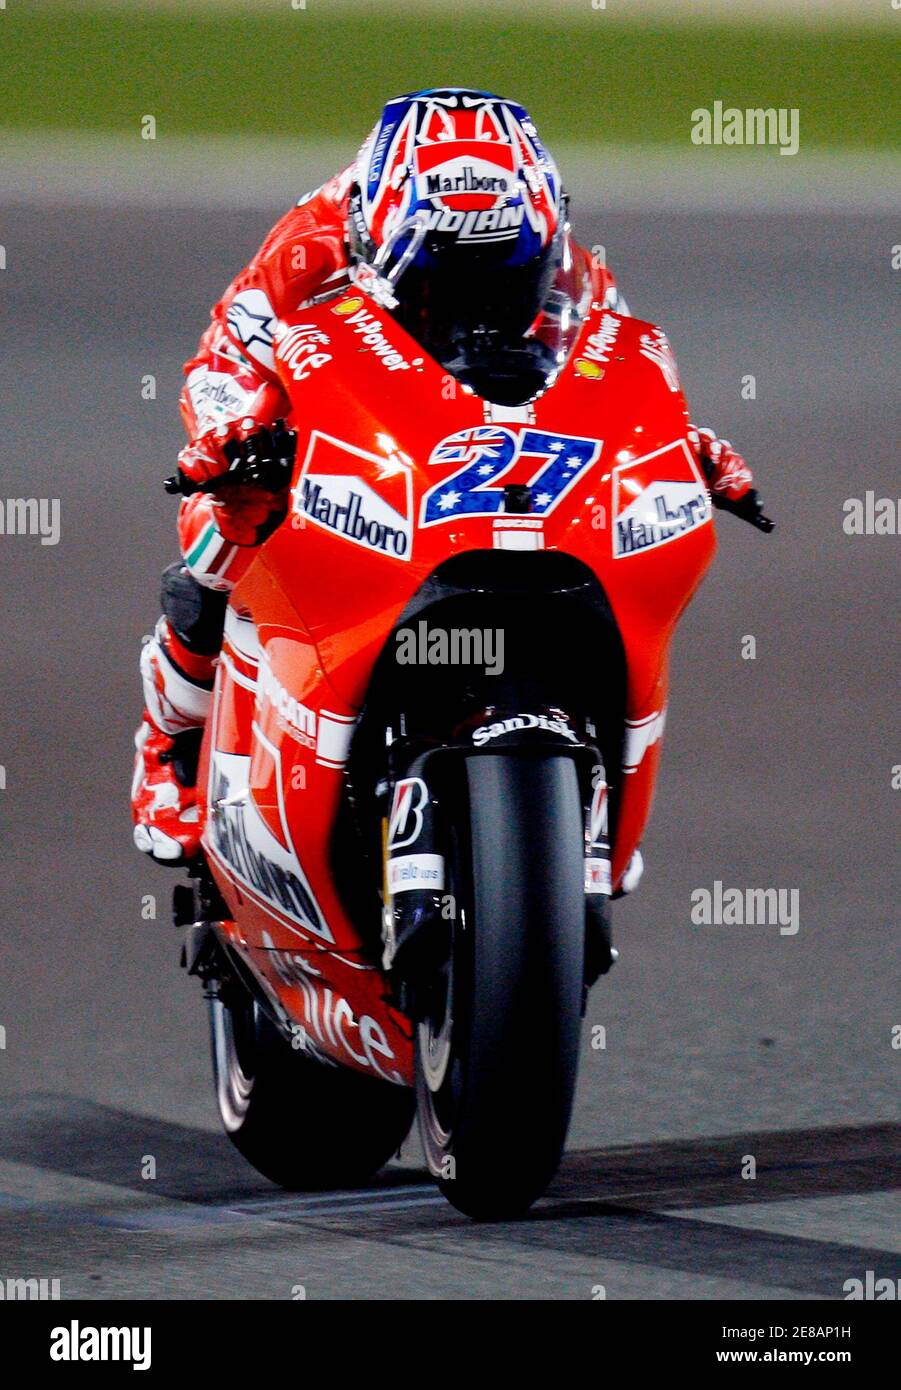 Ducati MotoGP rider Casey Stoner of Australia rides his bike during the Qatar  MotoGP race, at the Losail international circuit in Doha April 13, 2009.  The MotoGP race was cancelled on Sunday